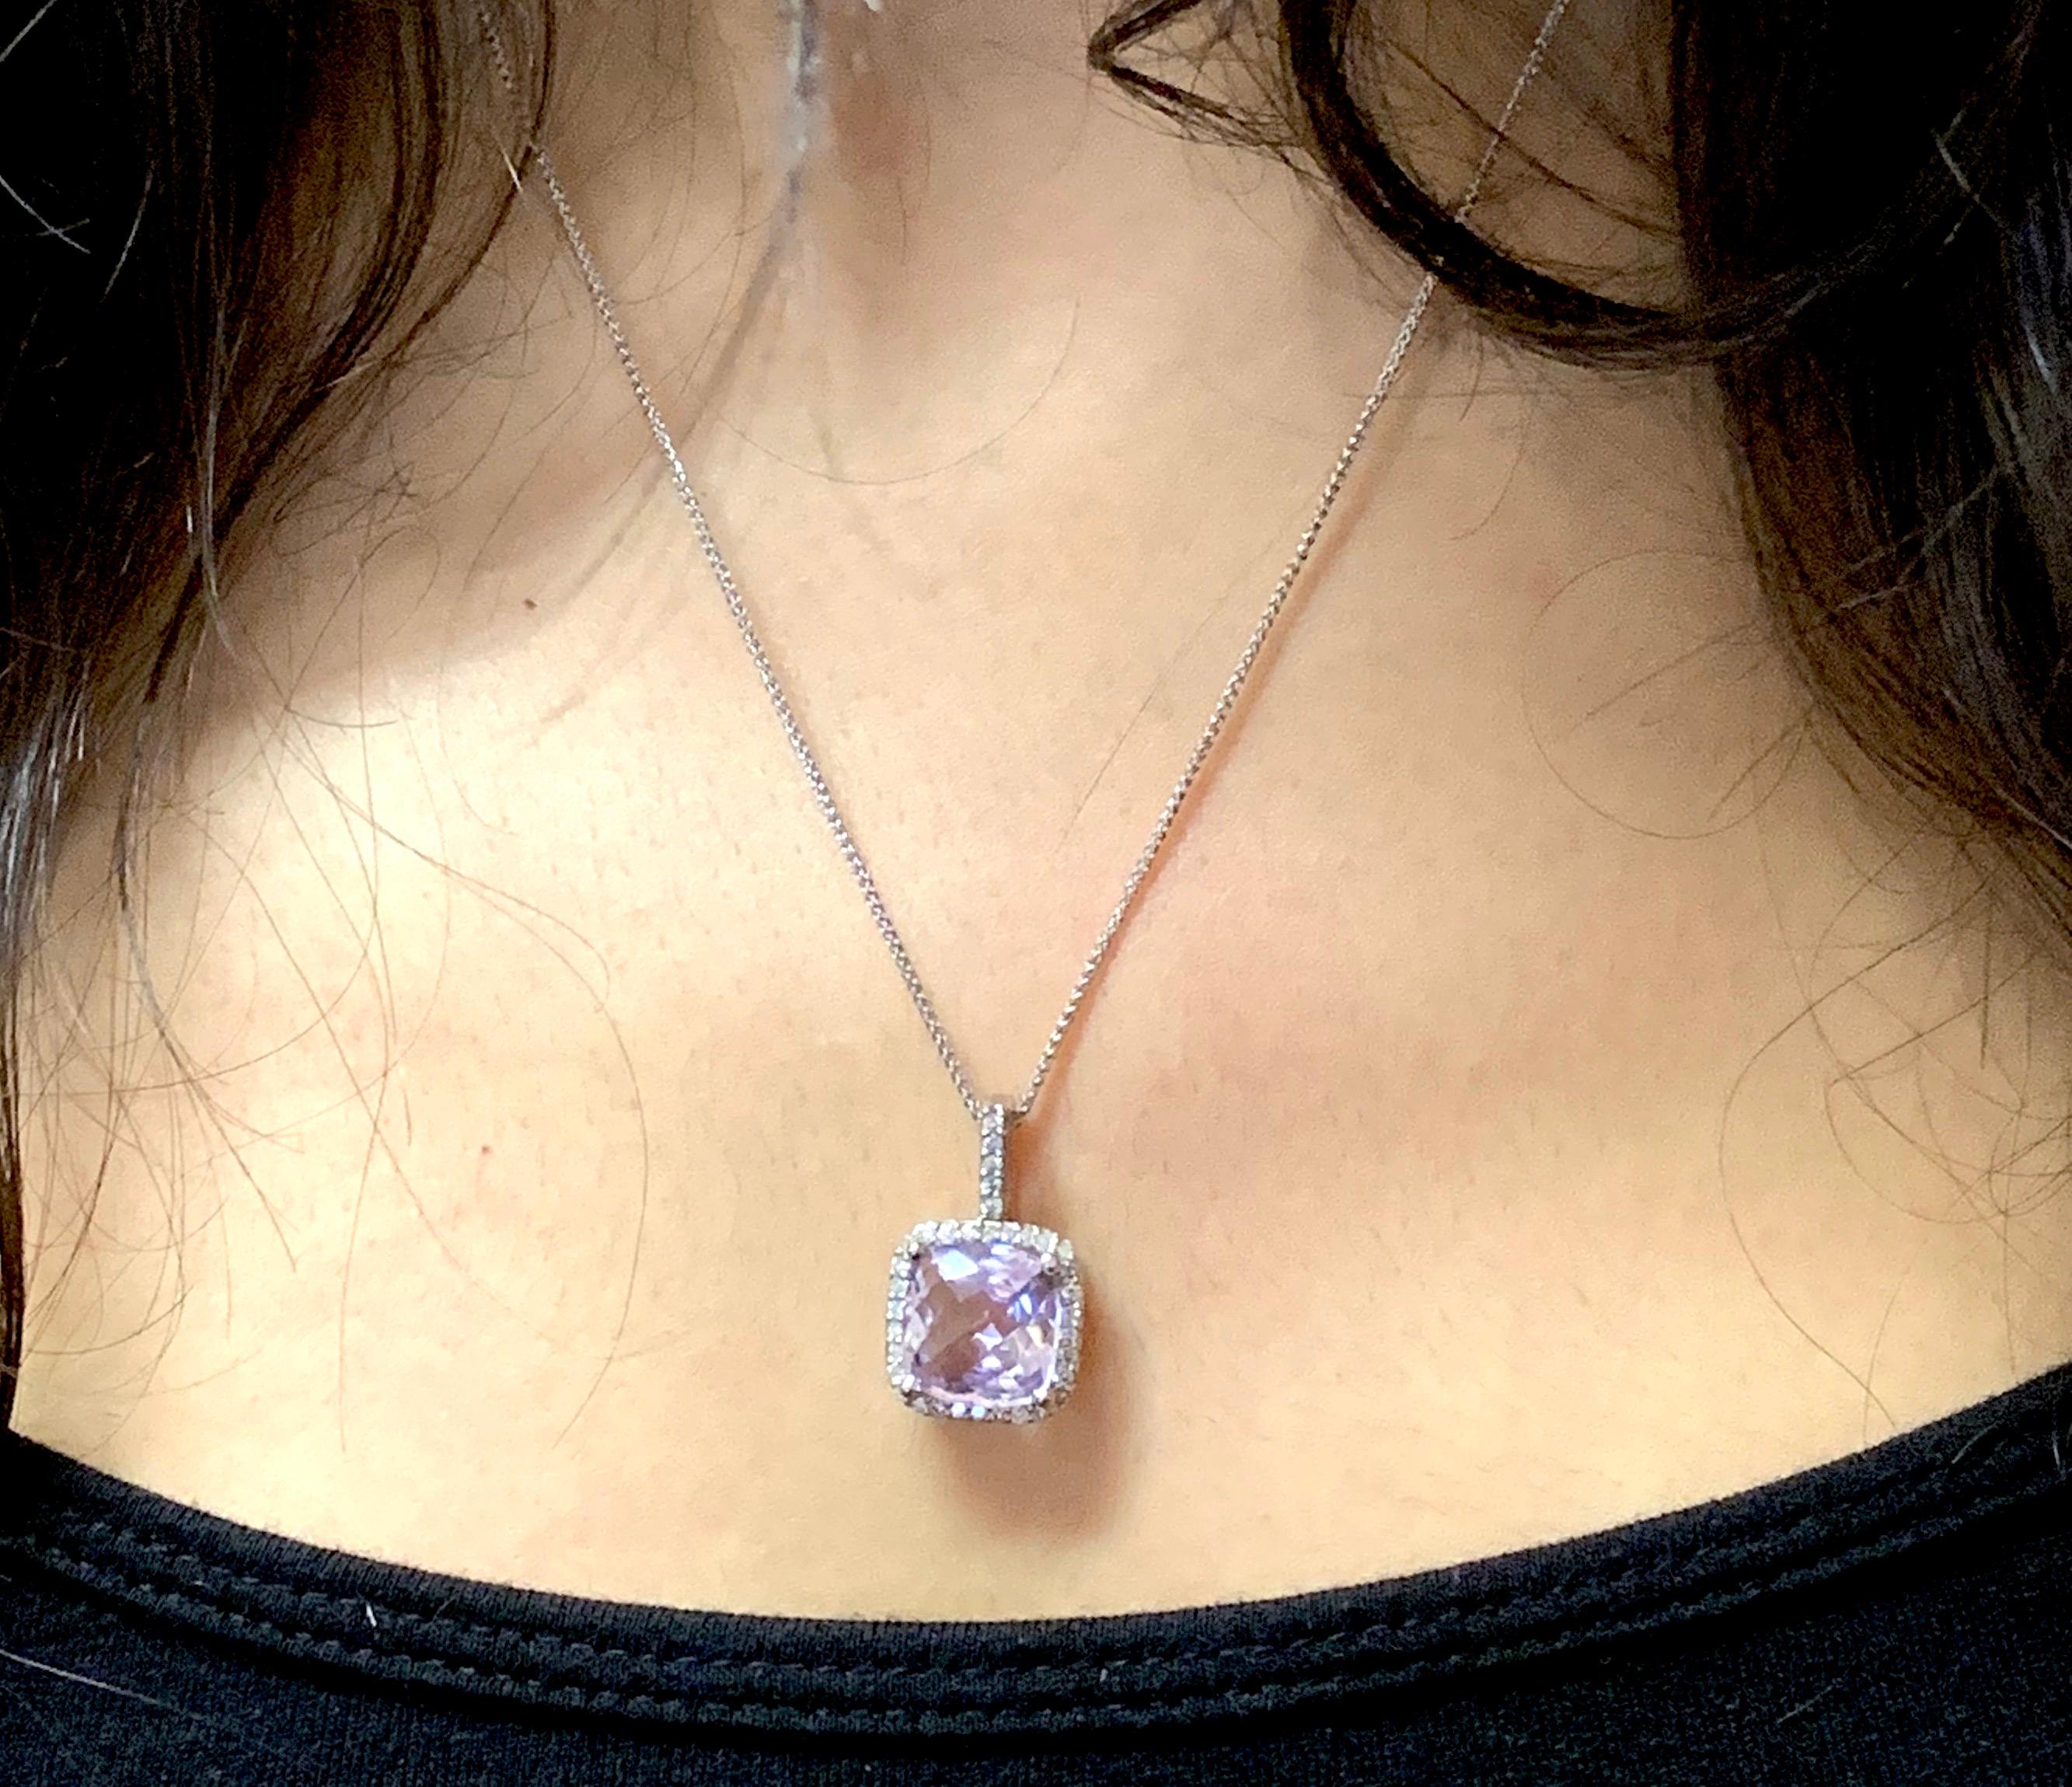 Material: 14k White Gold 
Center Stone Details: 4.75 Carat Cushion Cut Rose Amethyst 11 mm
Mounting Diamond Details: 35 Round White Diamonds Approximately 0.38 Carats - 
Clarity: SI / Color: H-I

Fine one-of-a-kind craftsmanship meets incredible